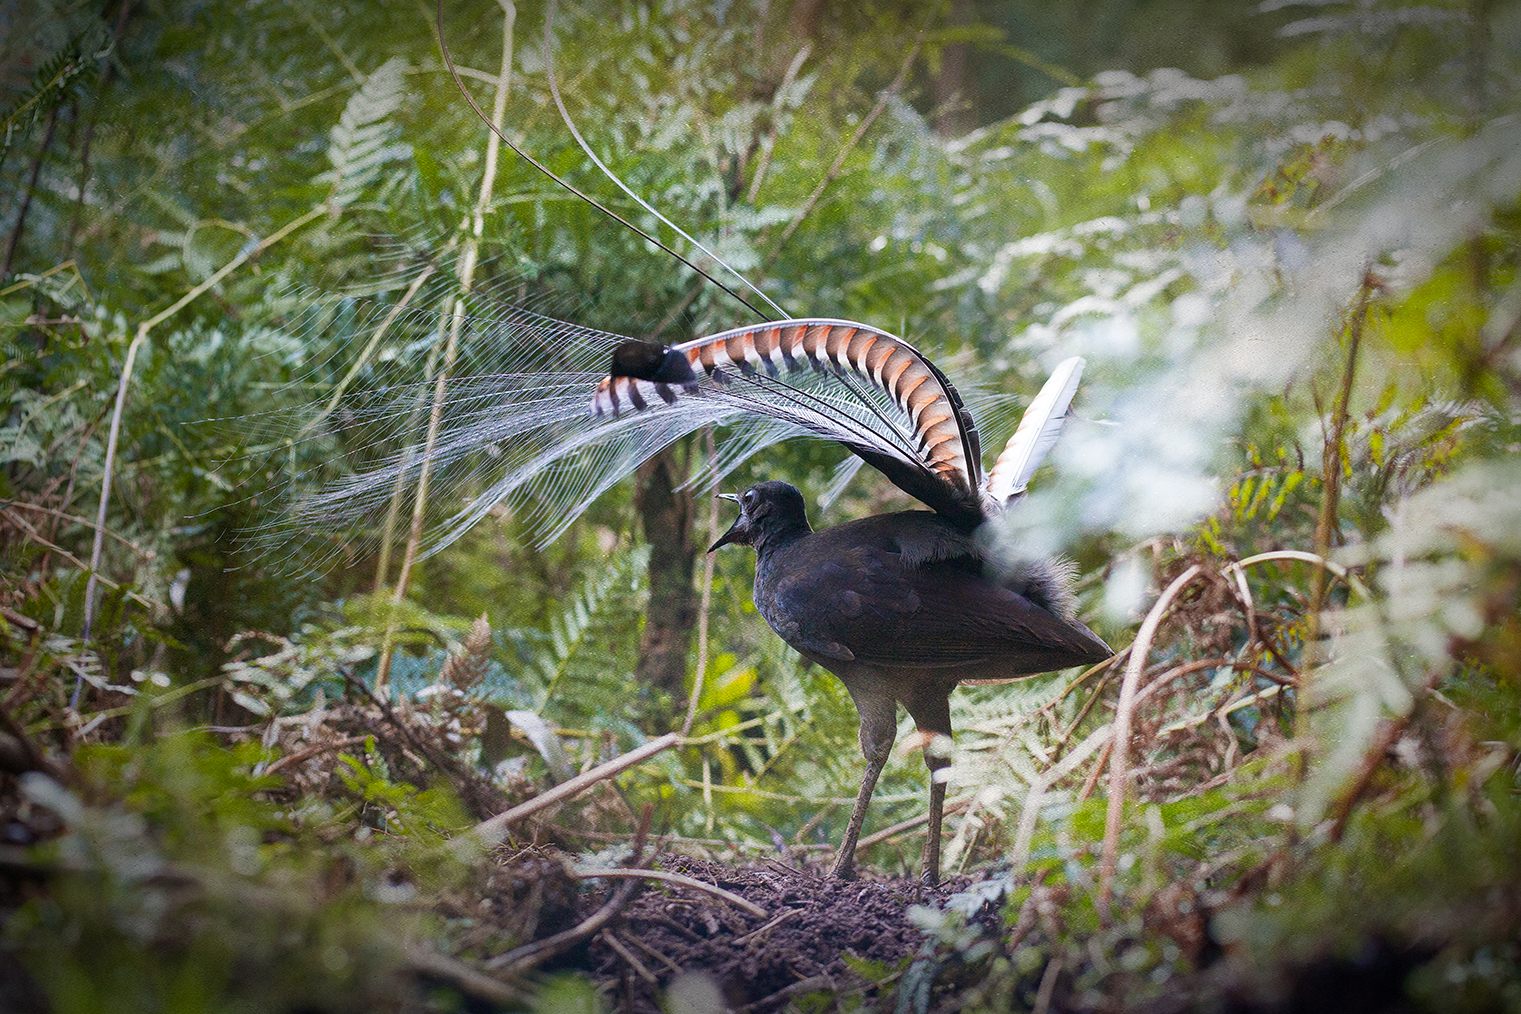 The Message of the Lyrebird